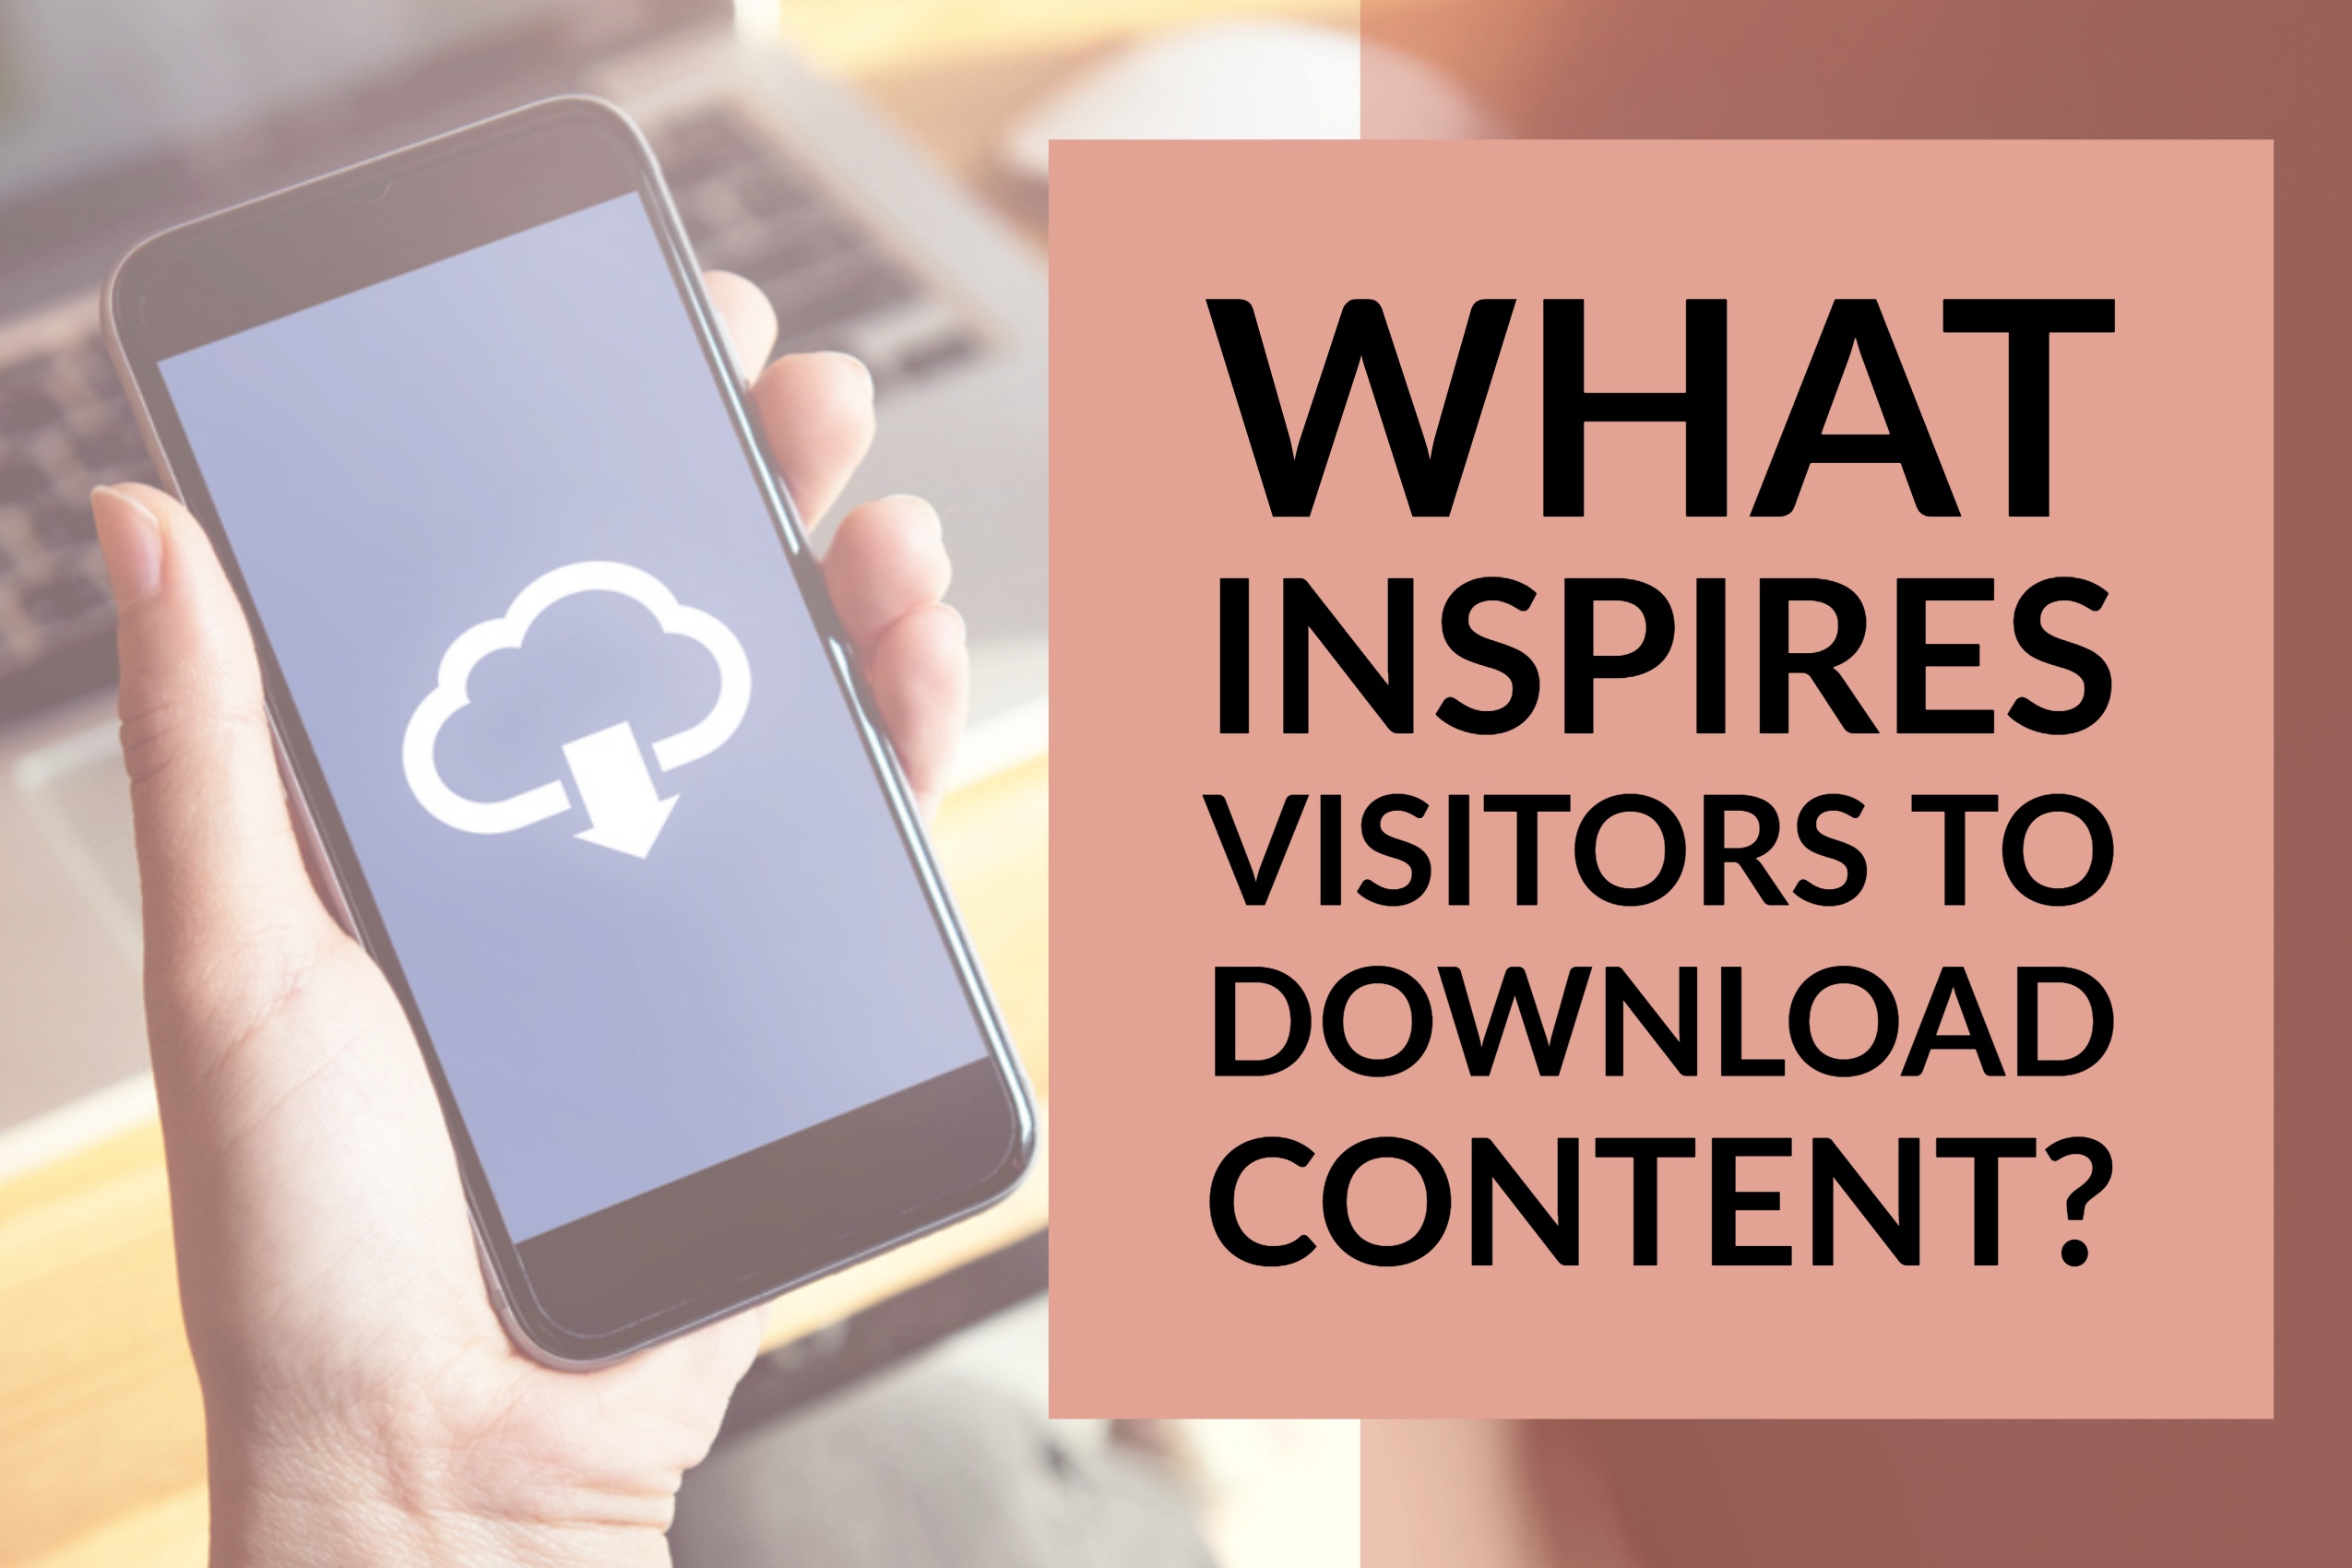 What Inspires Visitors to Download Content?